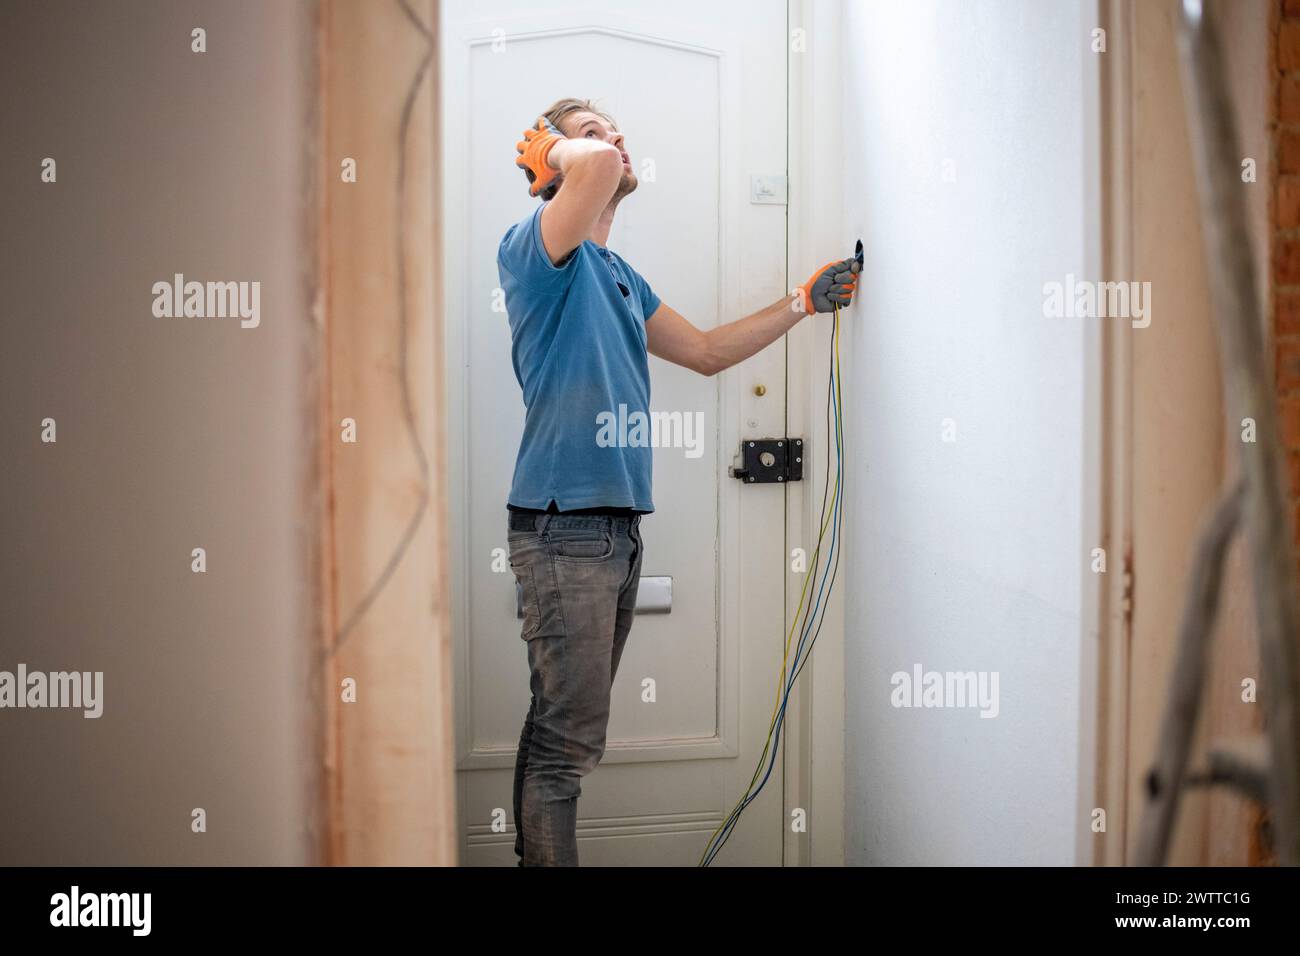 Person drilling into a white door while wearing safety goggles. Stock Photo